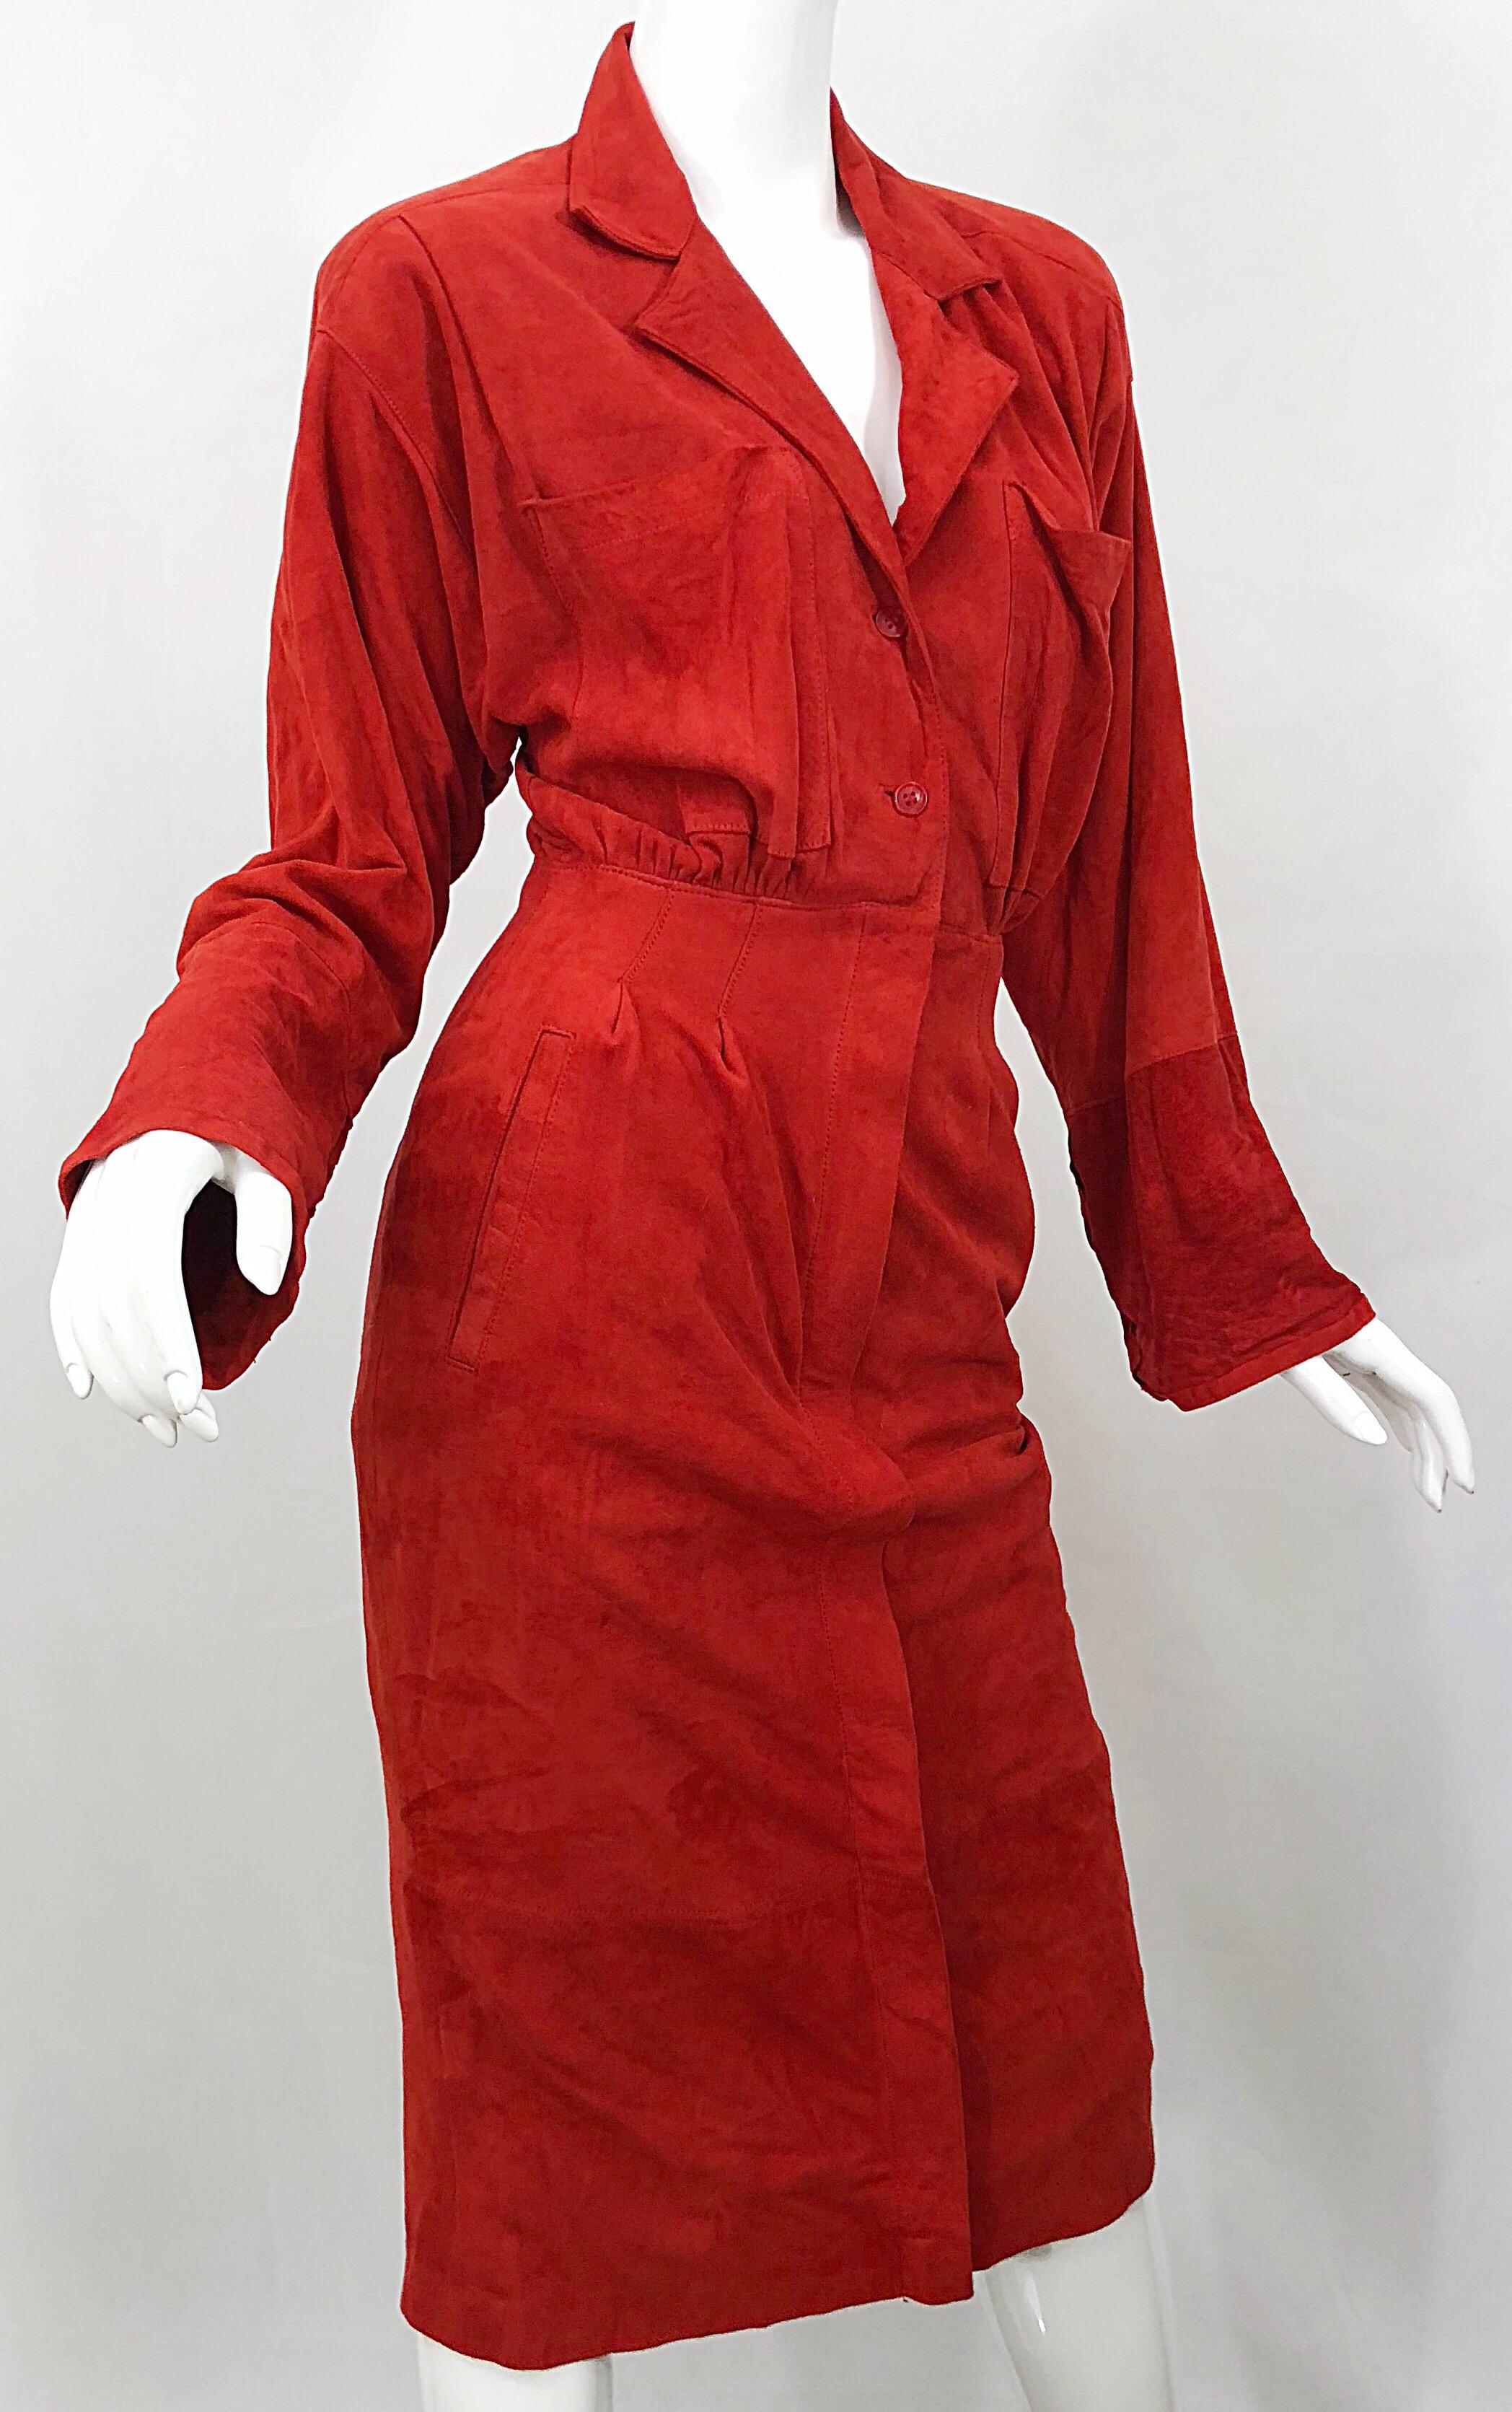 Chic 1990s Red Rust Suede Leather Size 4 / 6 Long Sleeve Vintage 90s Shirt Dress 6